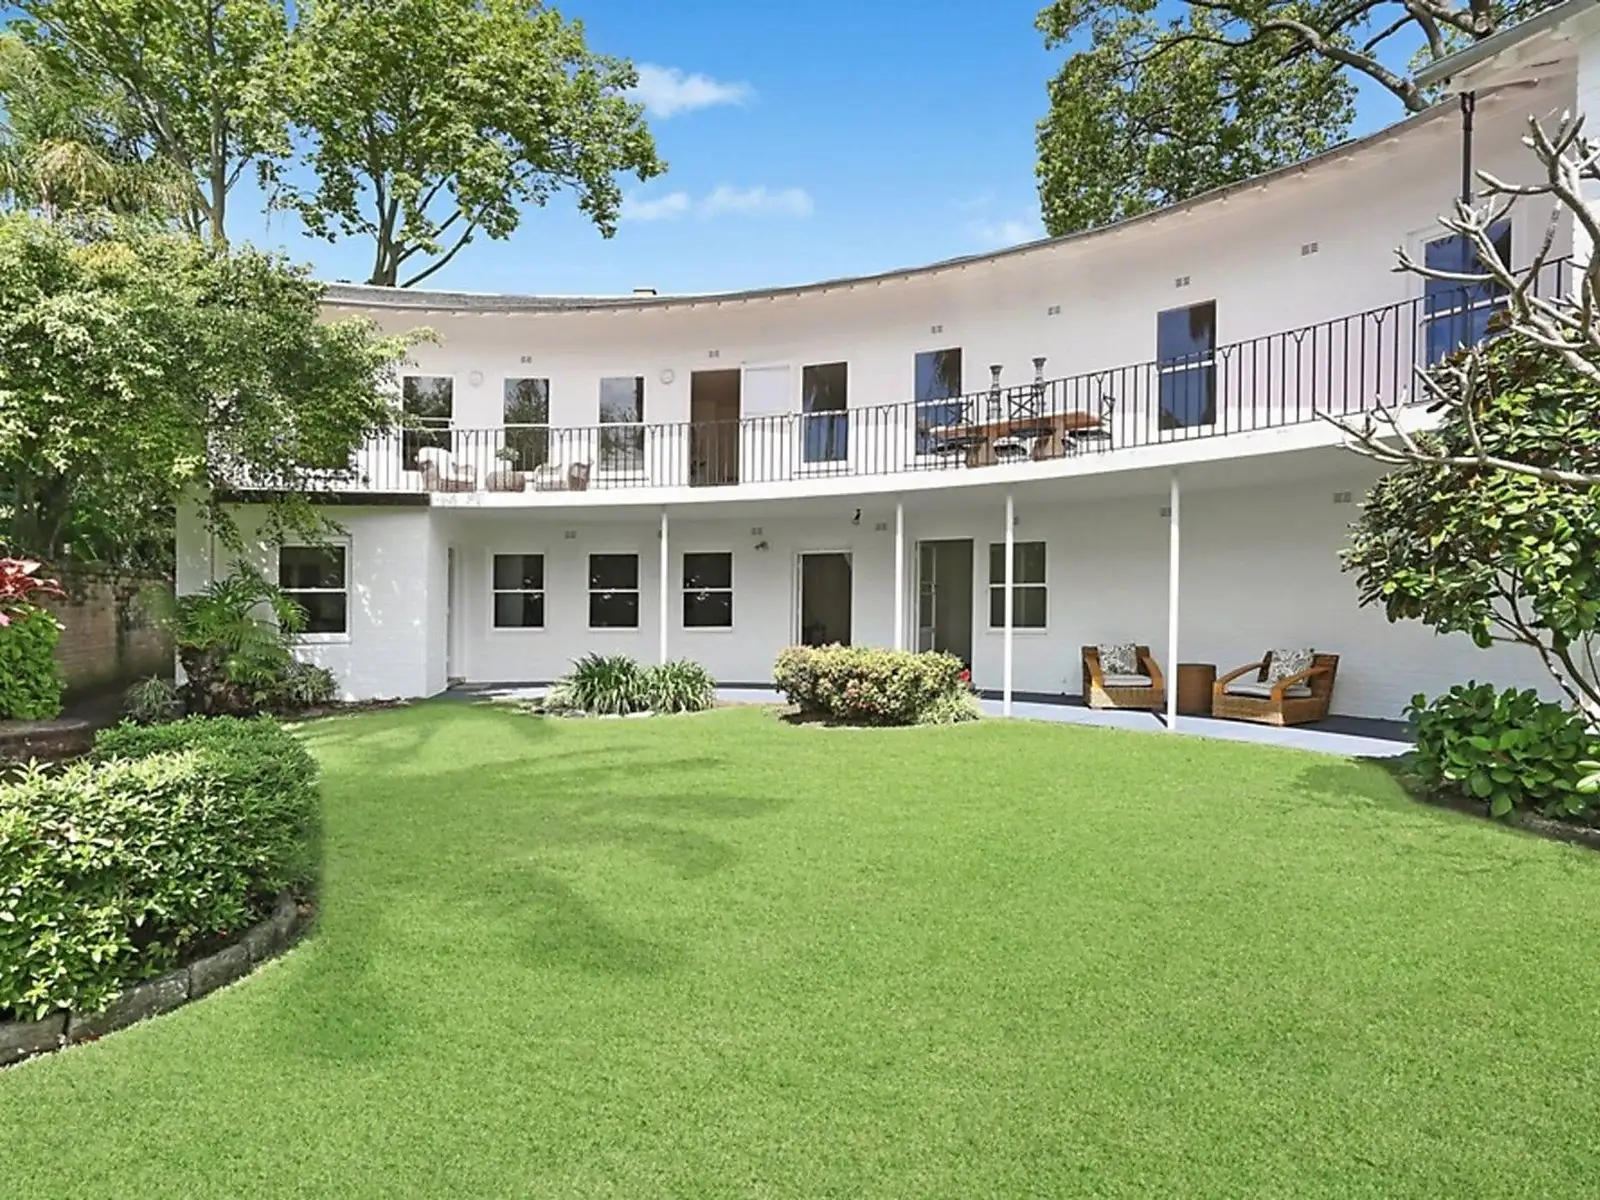 Photo #1: 15 Rosemont Avenue, Woollahra - Sold by Sydney Sotheby's International Realty